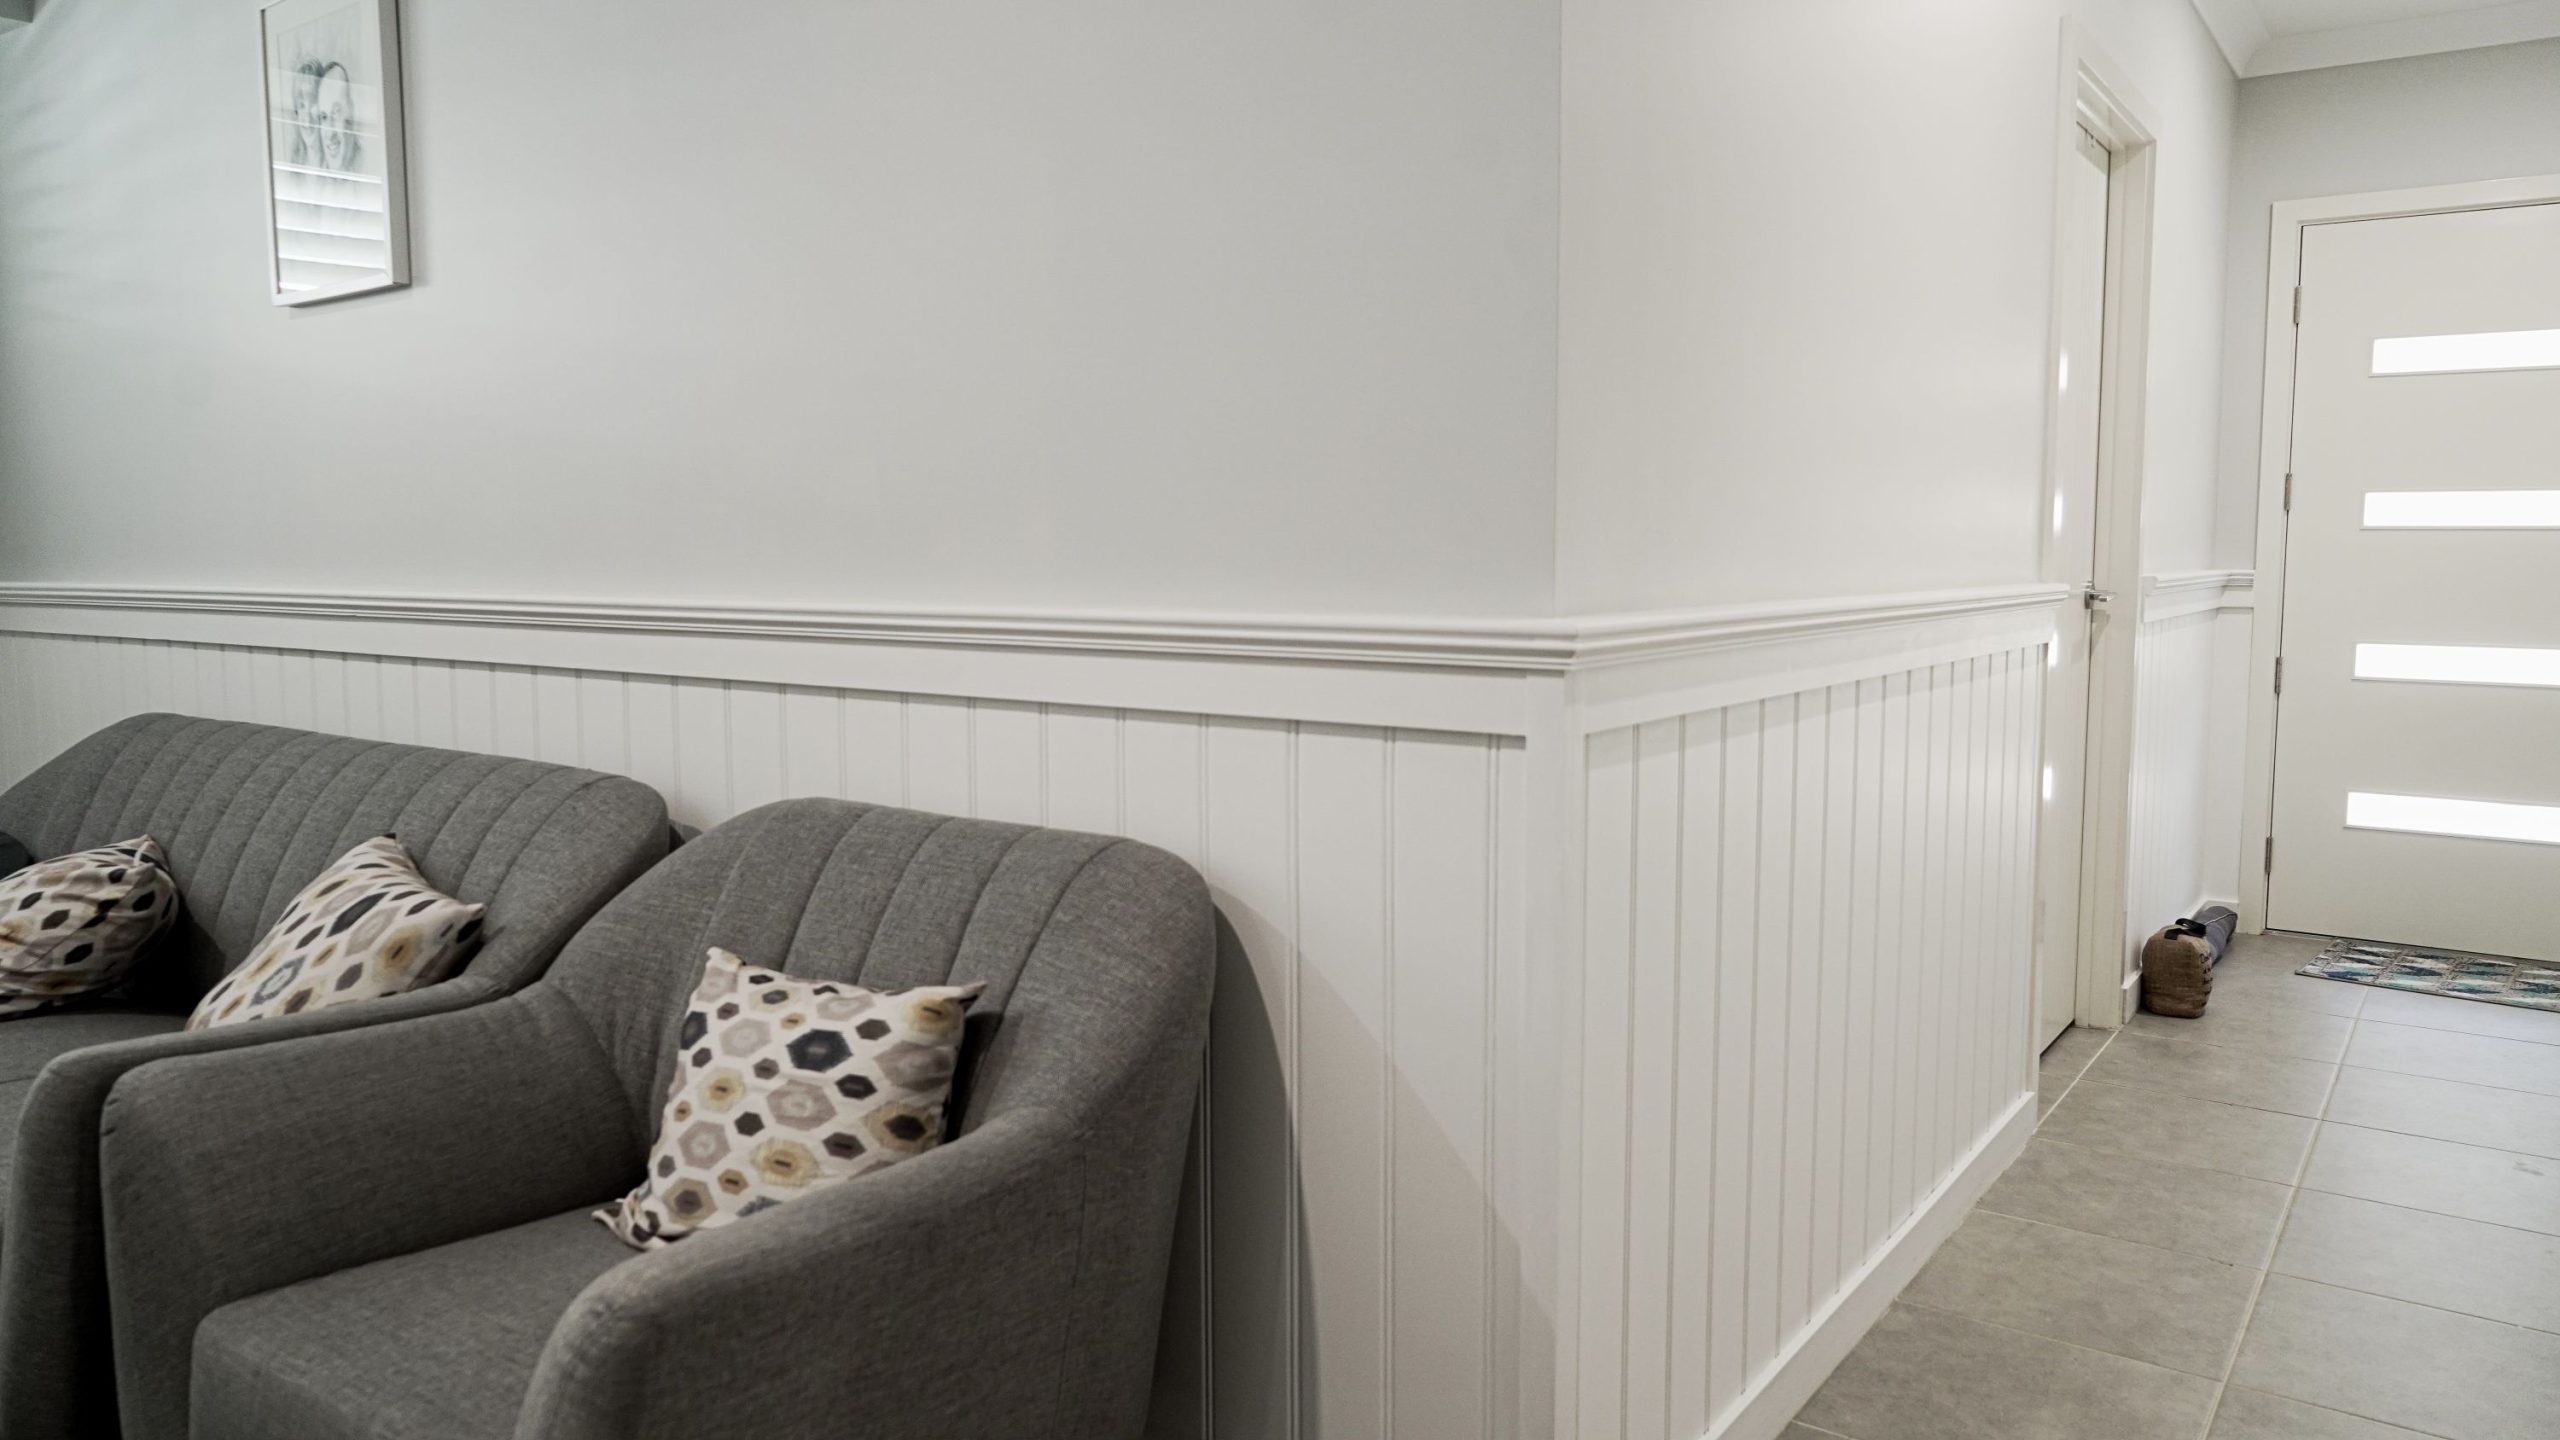 Wainscoting painted white